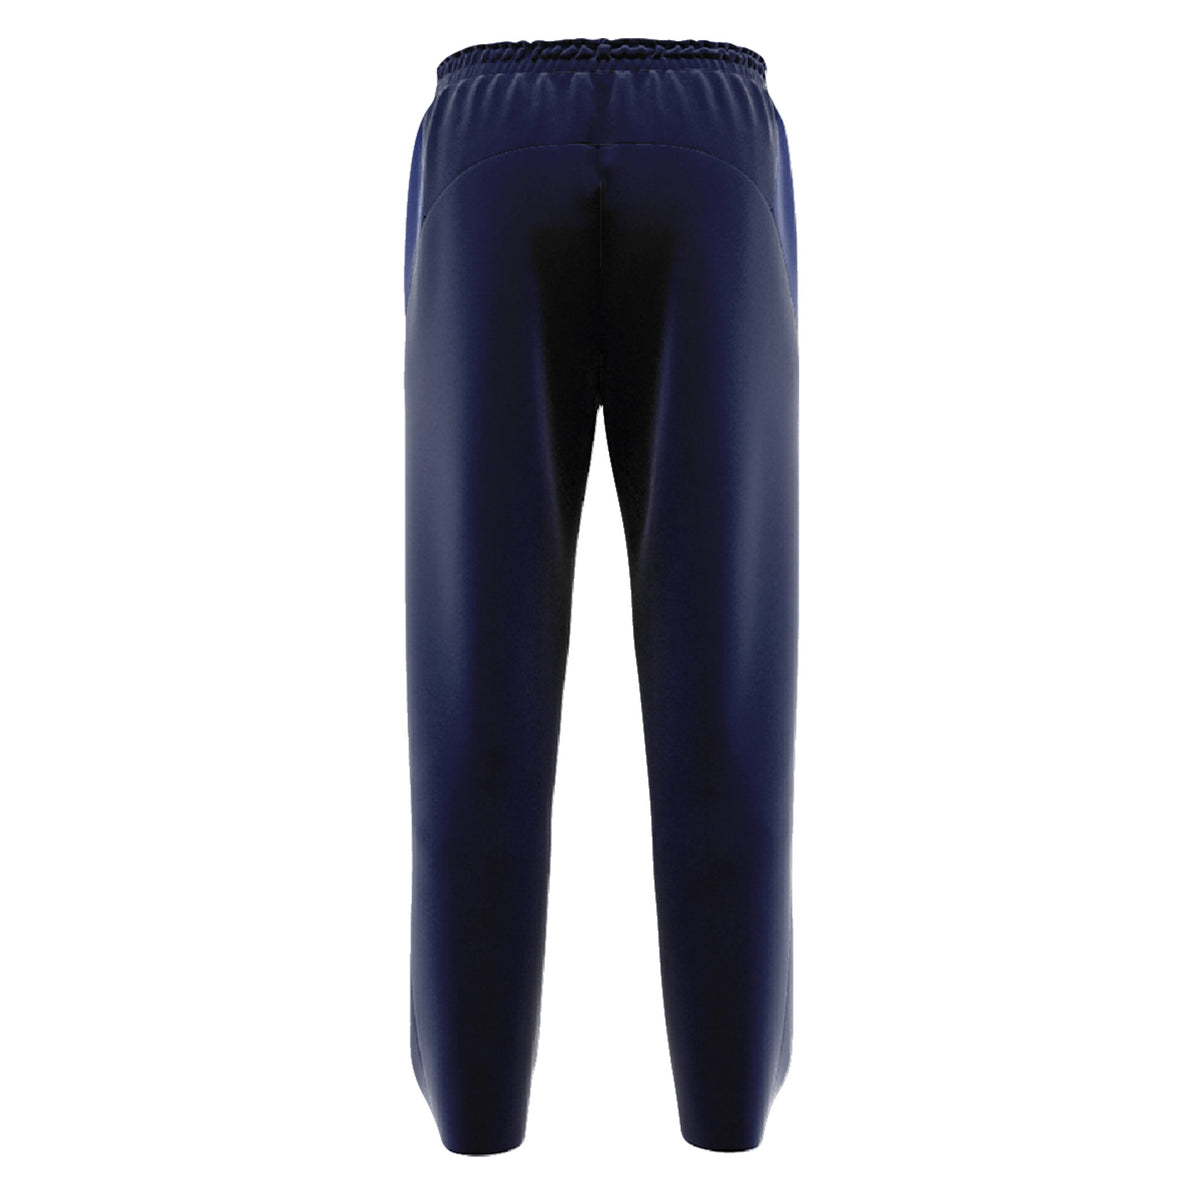 Claires Court Cricket Trousers: Navy